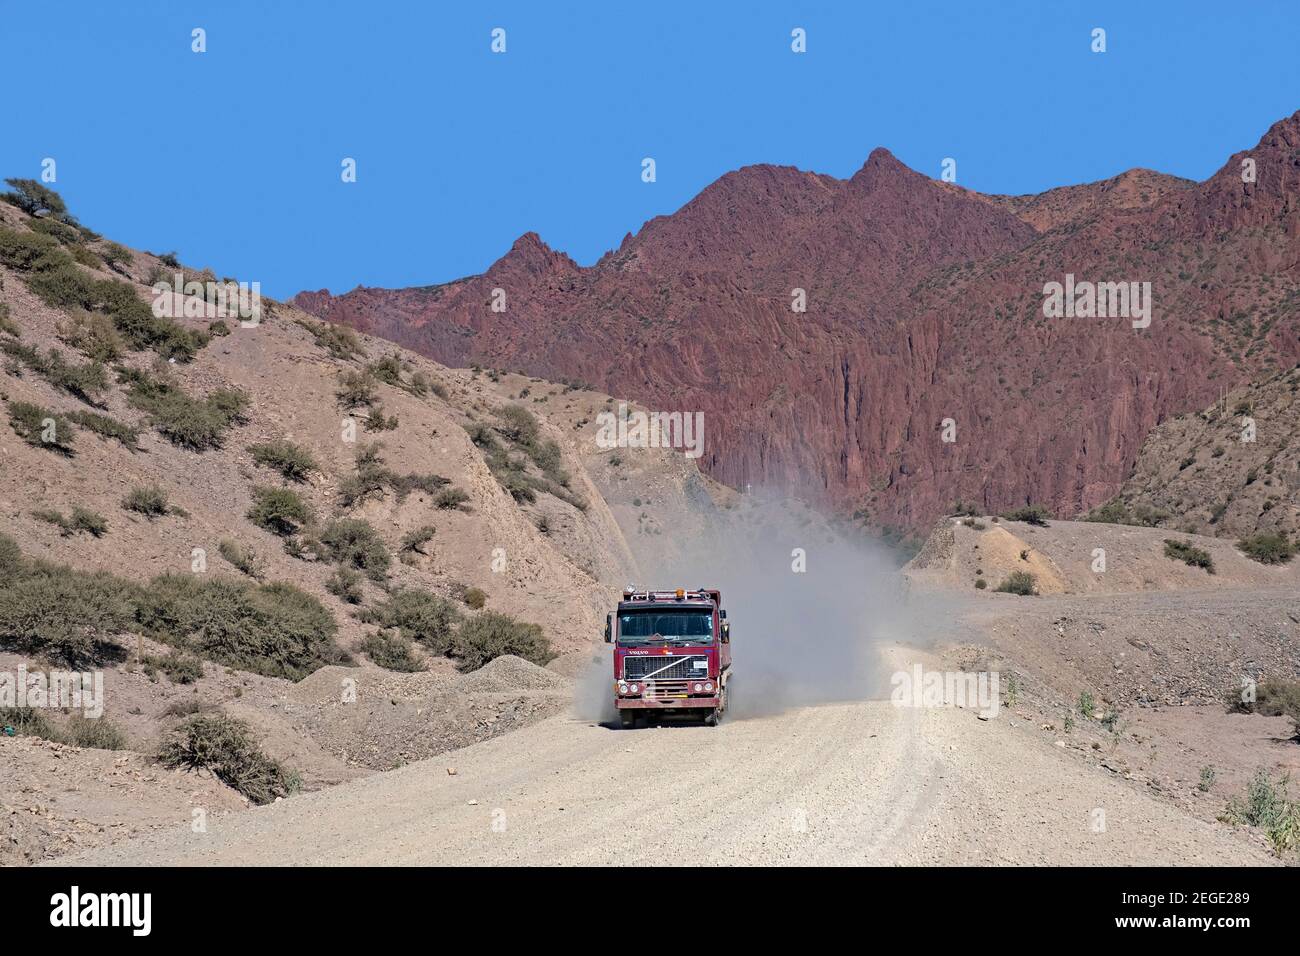 Truck driving on dirt road Route 21 / Ruta 21 on the high plateau of the Altiplano, between Tupiza and Uyuni, Potosí Department, Bolivia Stock Photo